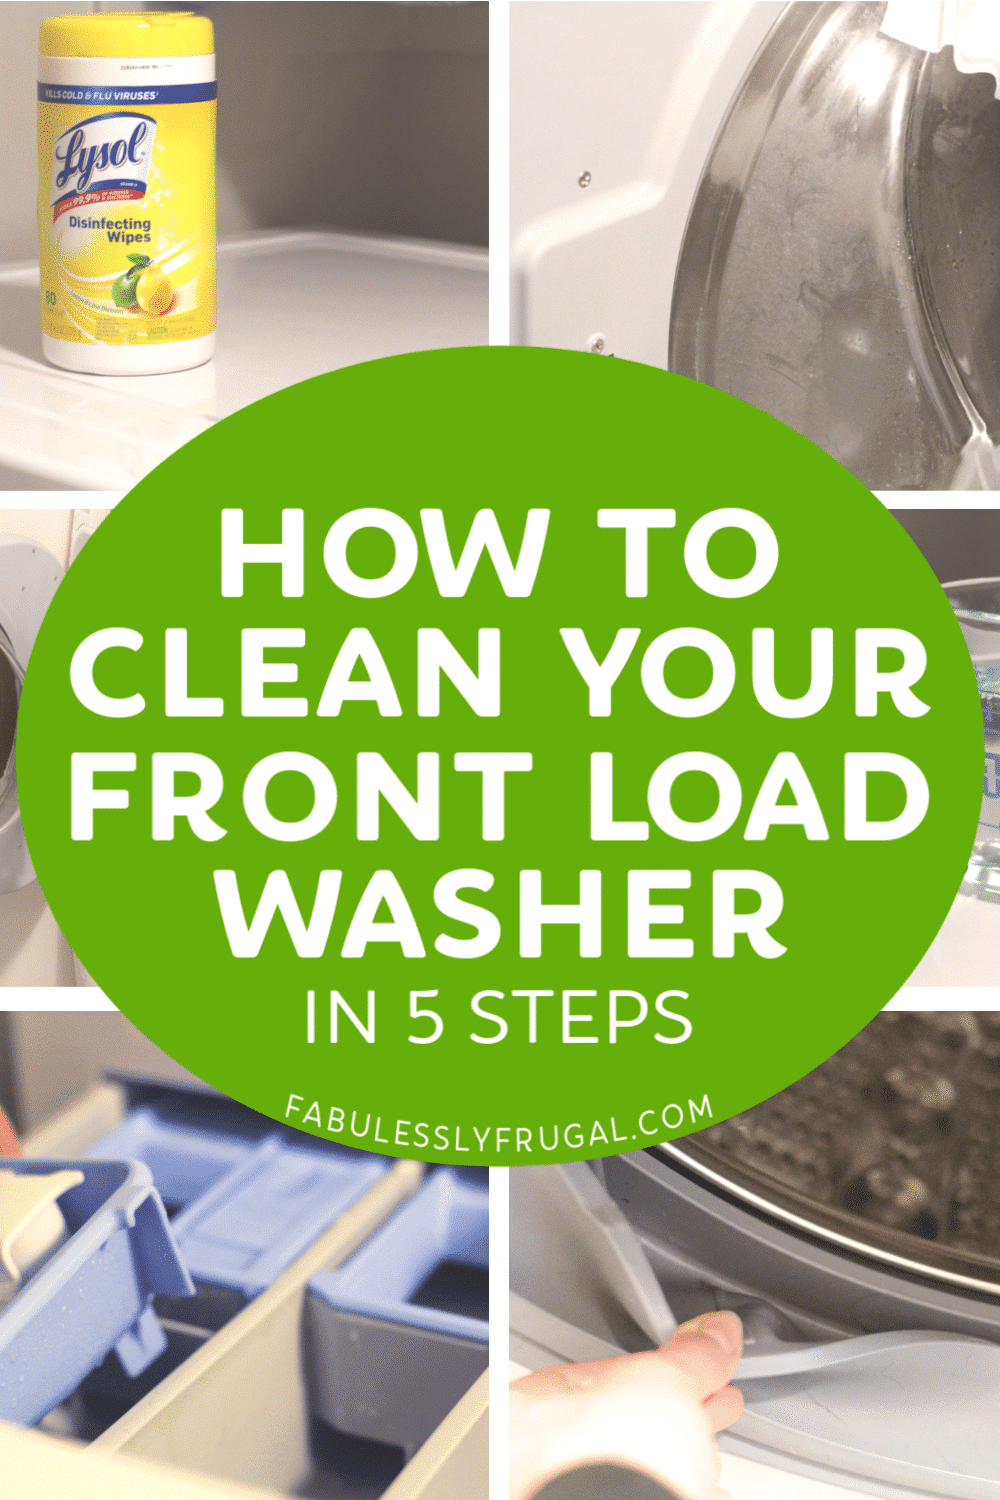 How to clean your front load washer